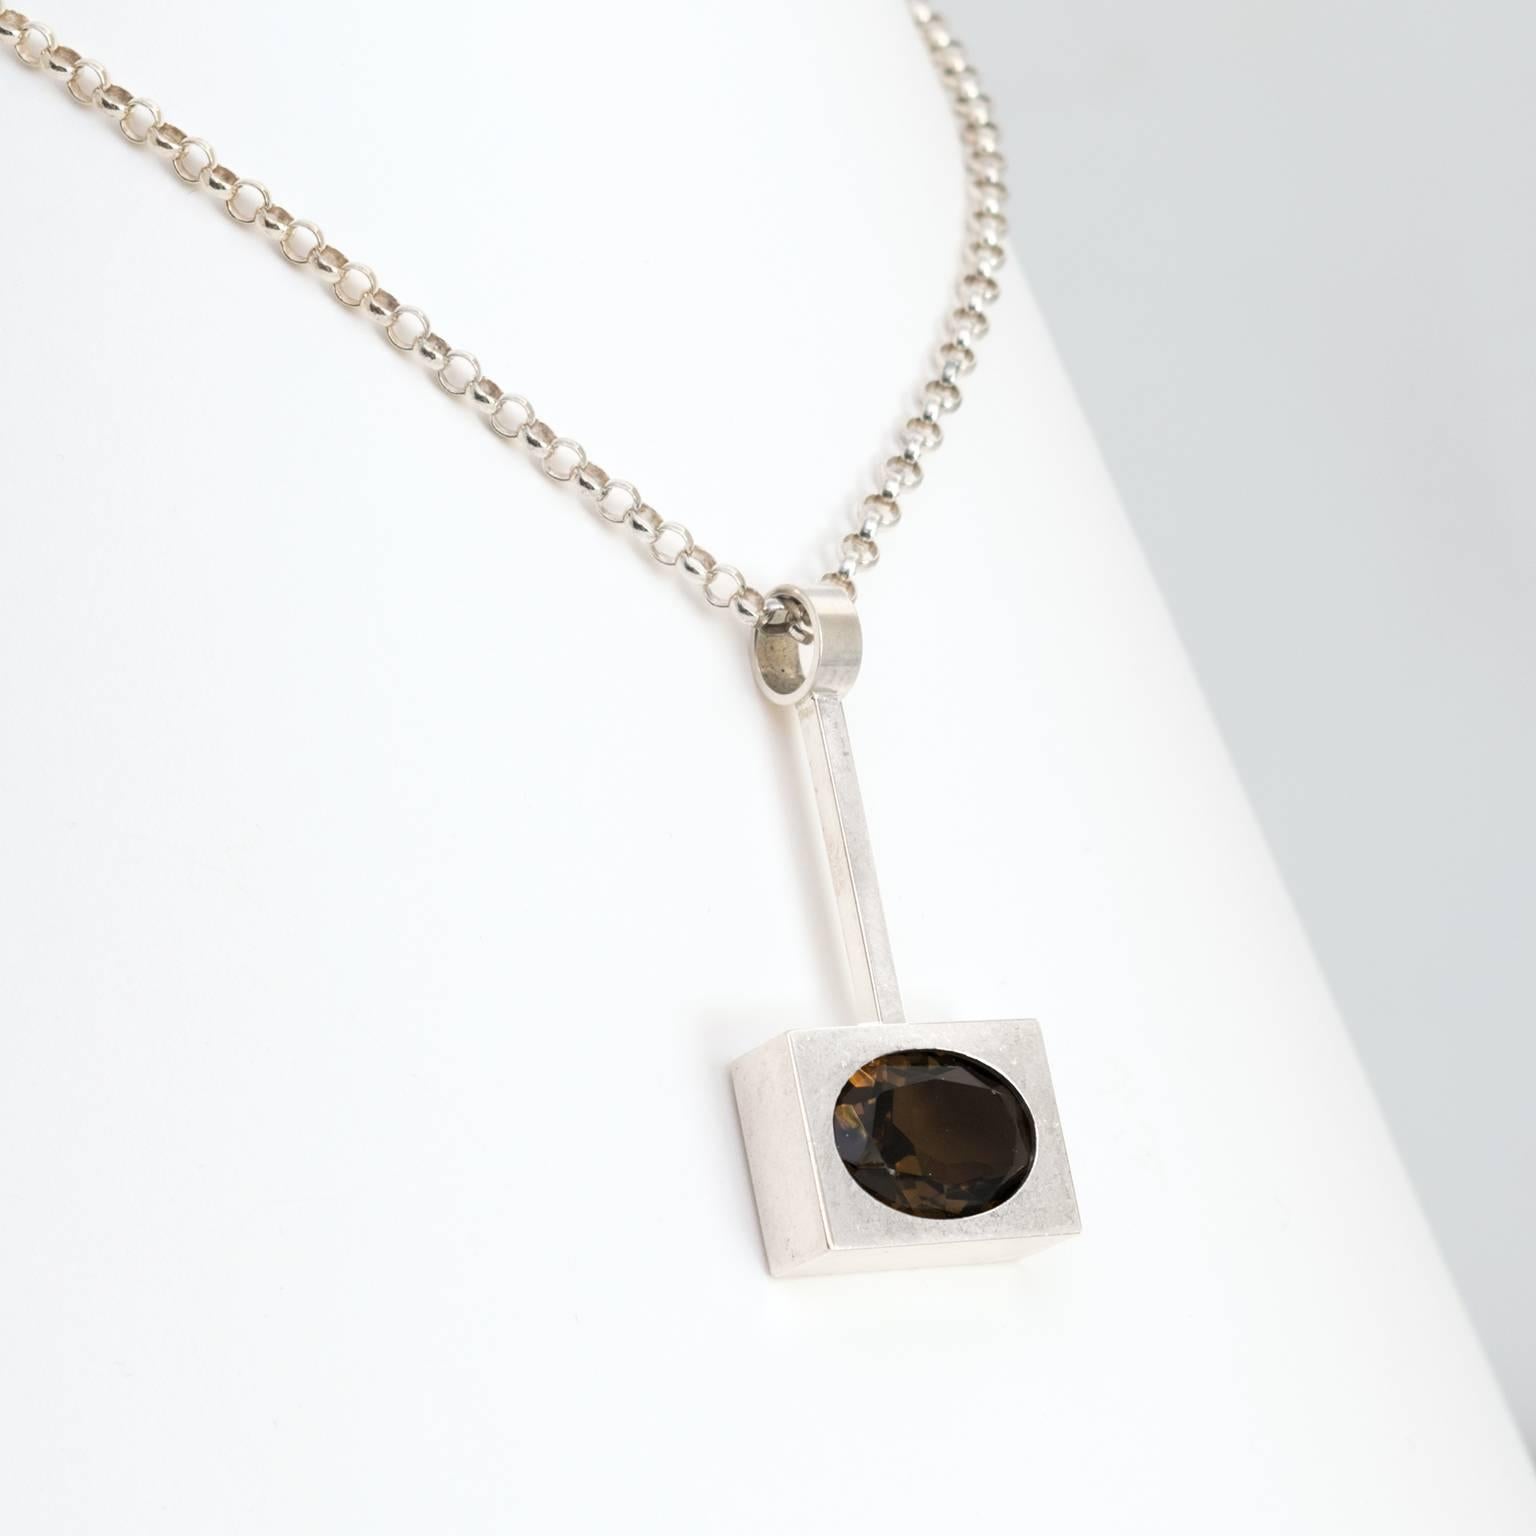 Silver Scandinavian Modern pendant with an inserted oval faceted smoky quartz stone. The chain is also silver. Designed by Kupitaan Kulta, Finland.
 
Chain length: 16